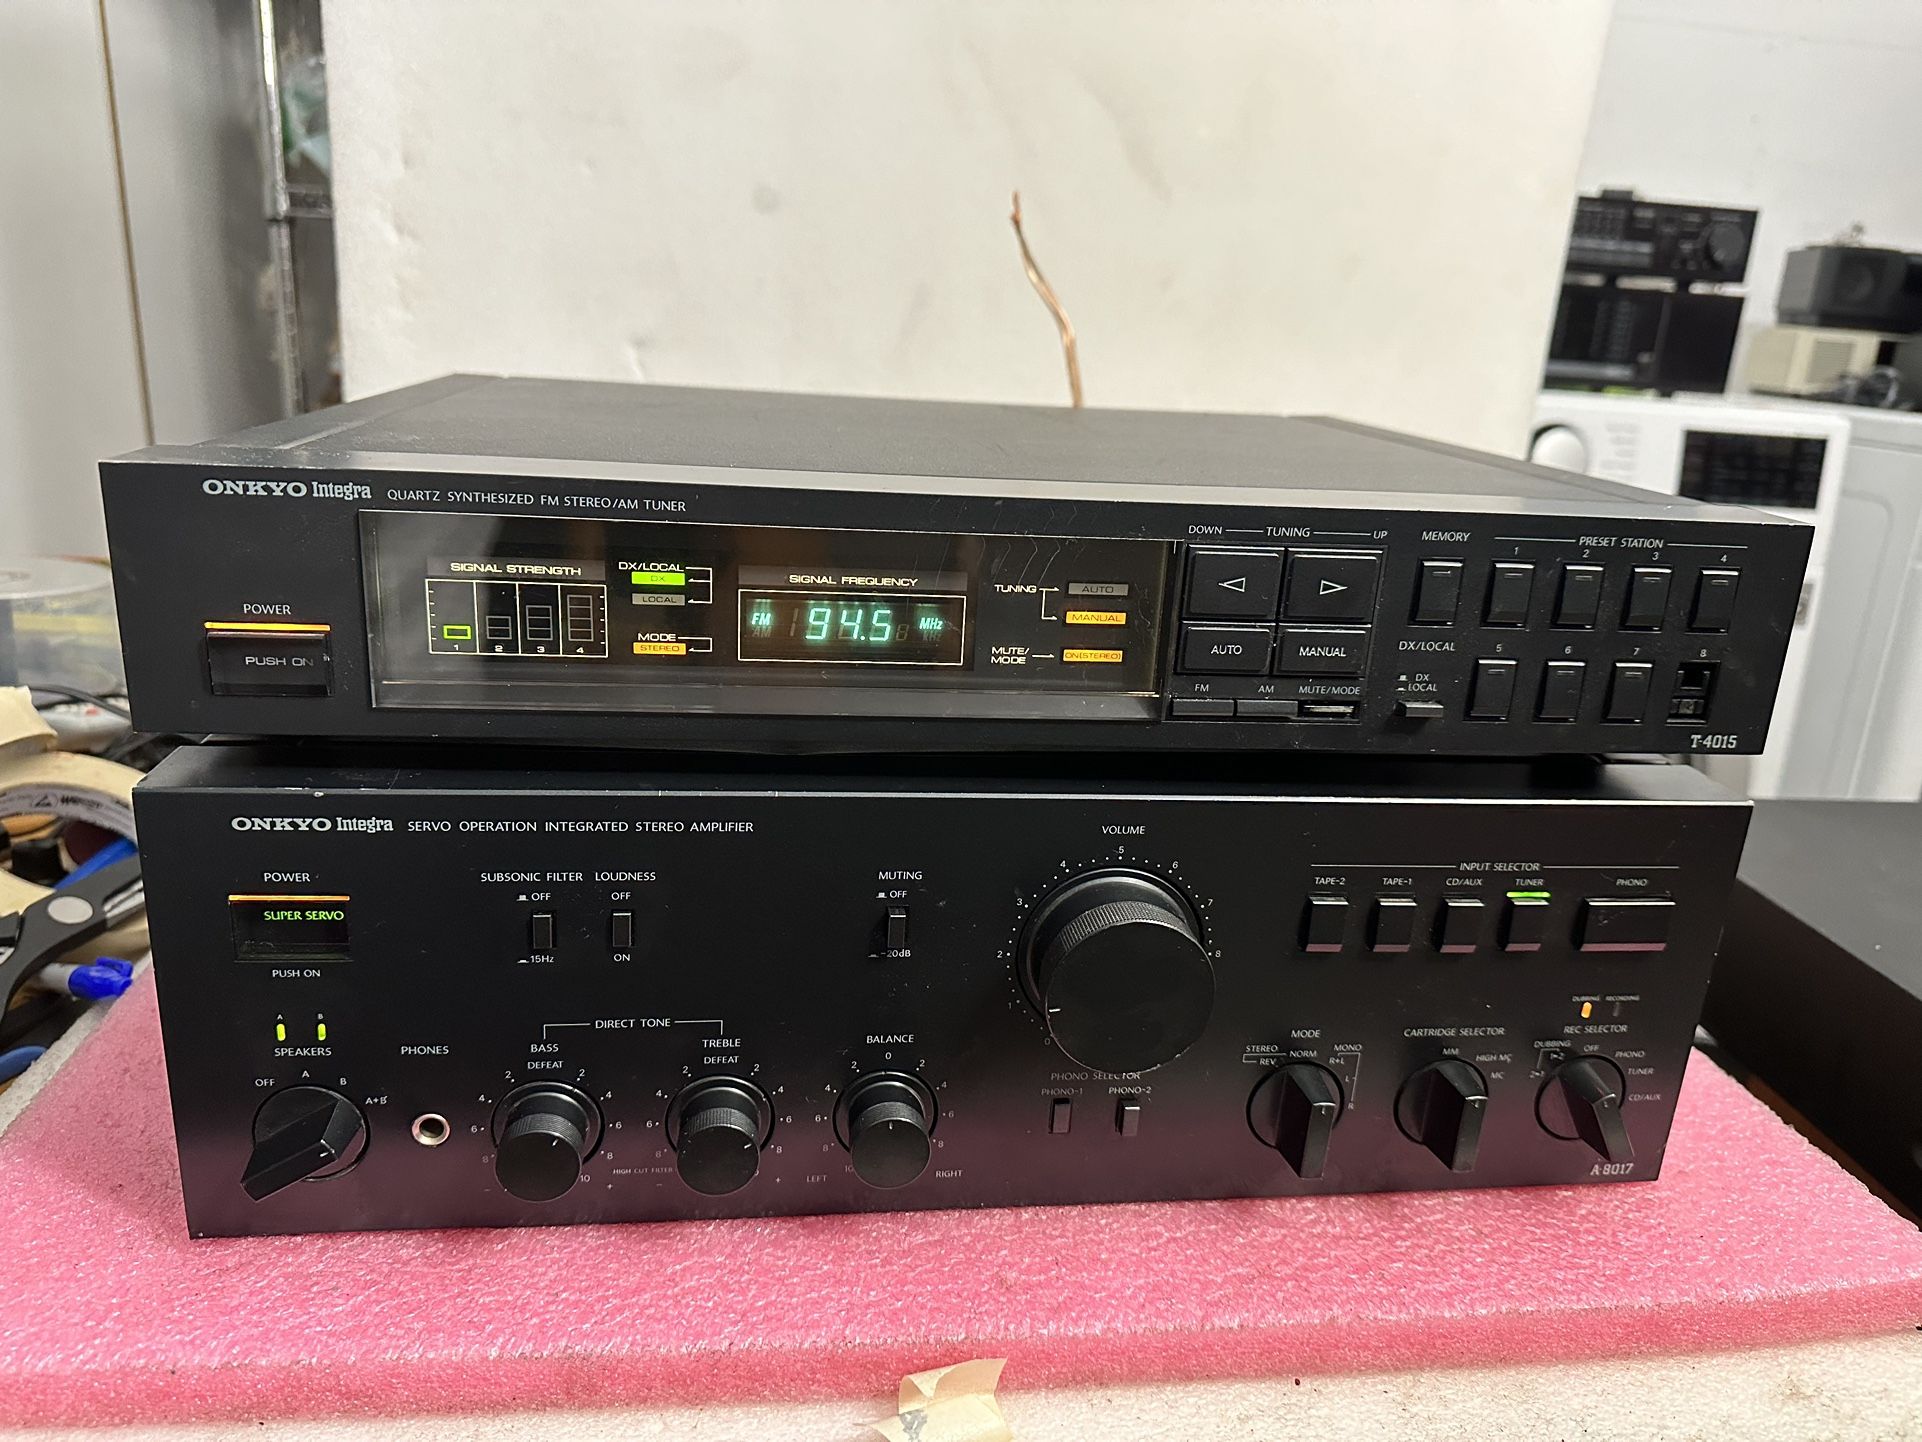 Onkyo A-8017 Integrated Stereo Amplifier and T-4015 AM/FM Stereo Tuner. MADE IN JAPAN 